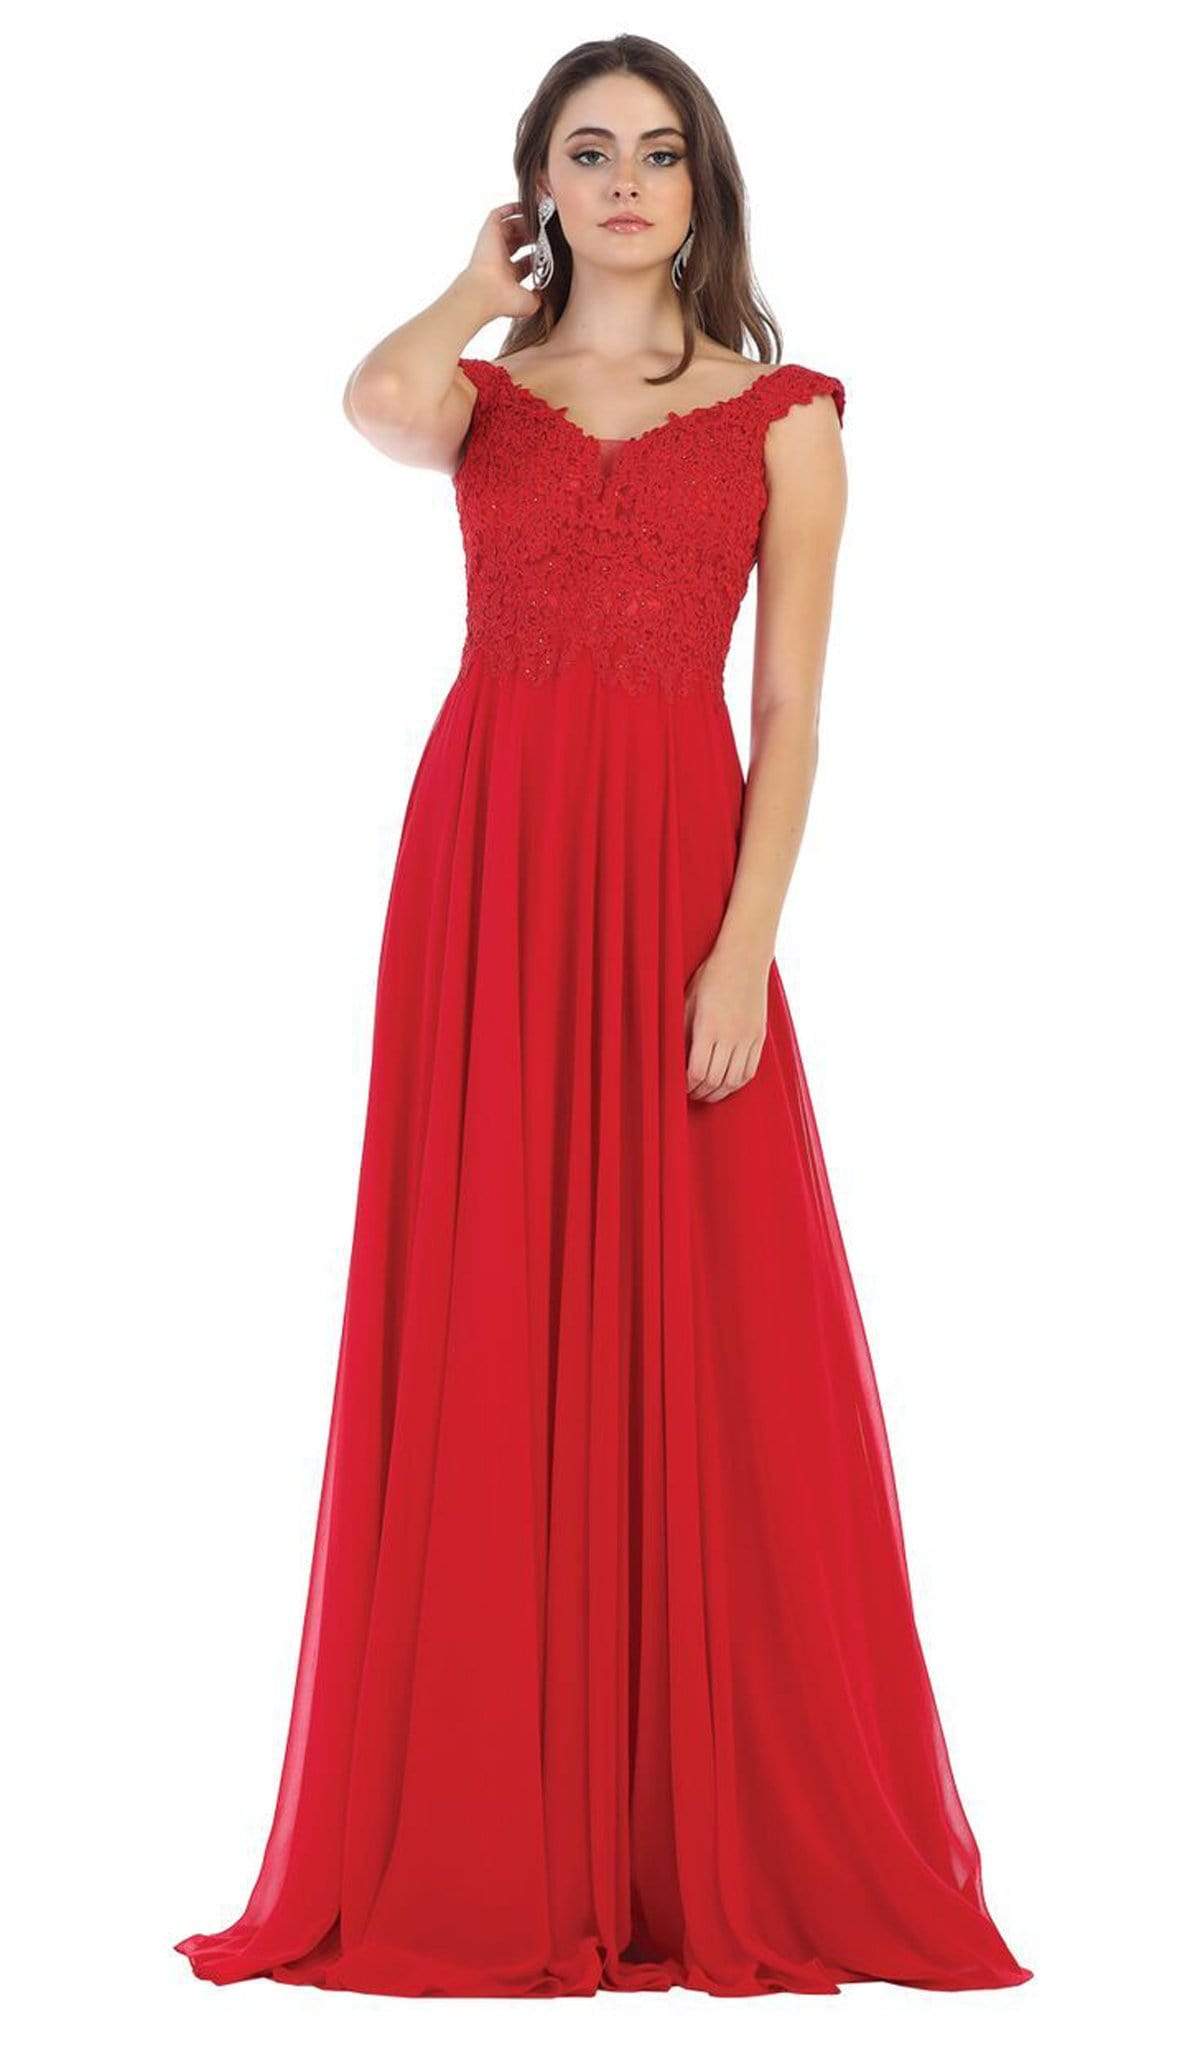 May Queen - MQ1602 V Neck Lace Applique Chiffon Long Formal Dress Formal Gowns 2 / Red